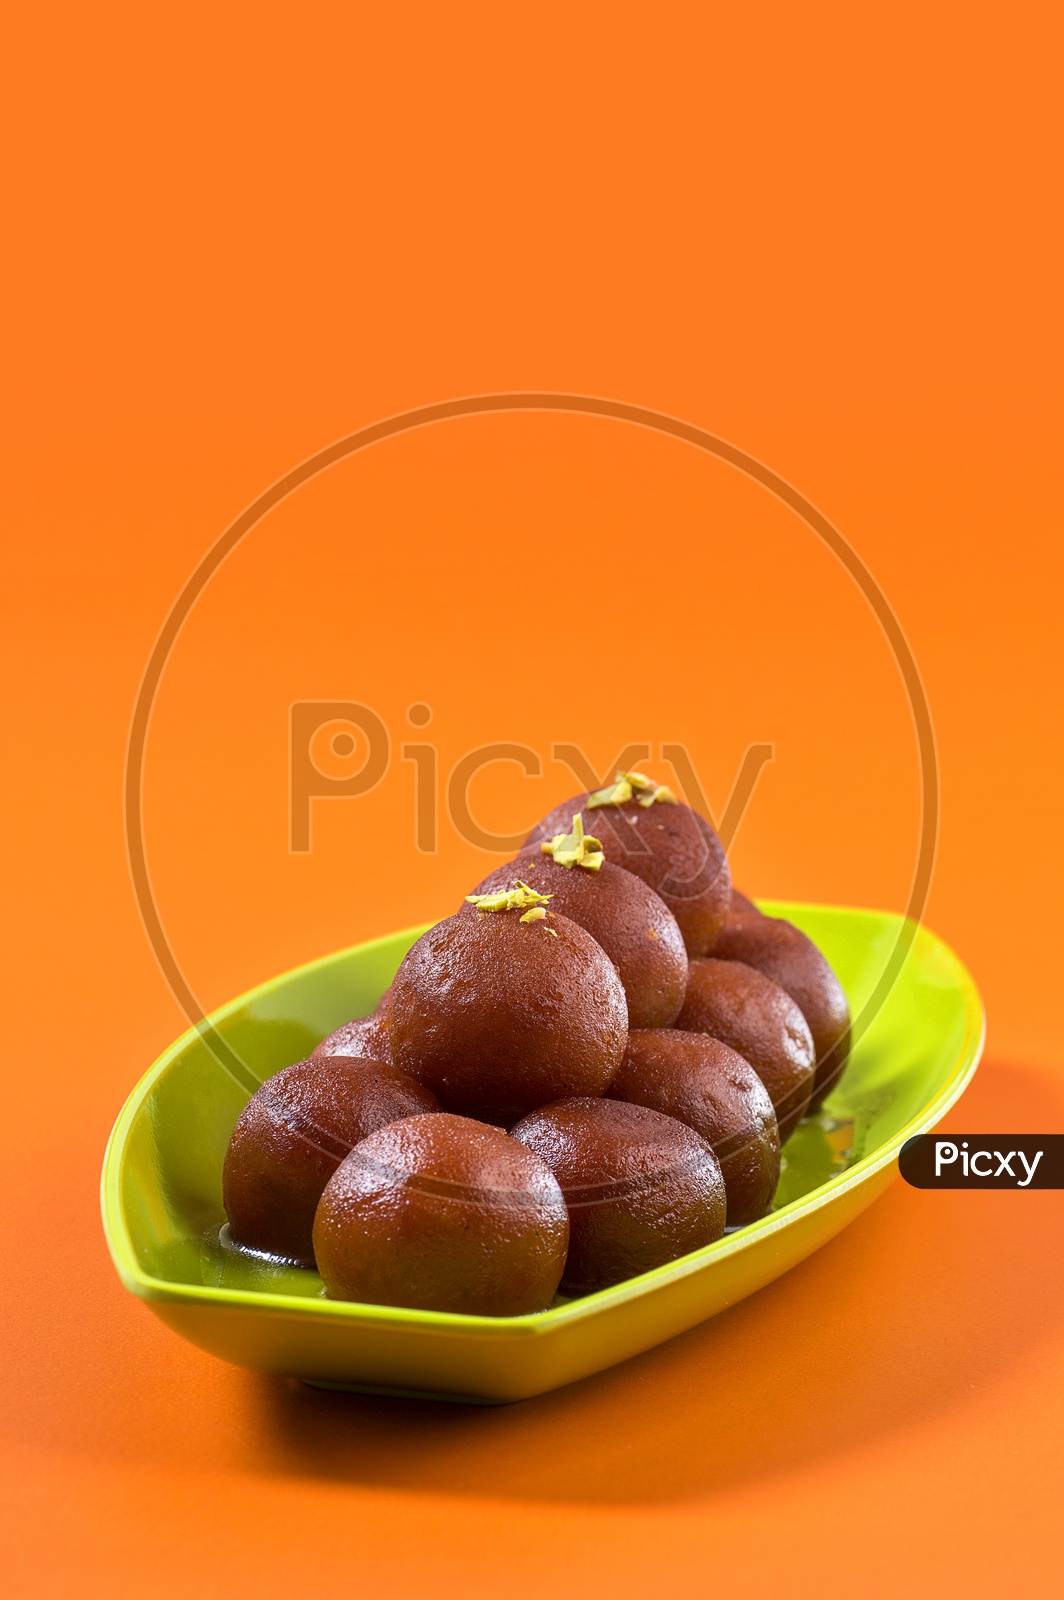 Image of Indian Dessert or Sweet Dish Gulab Jamun topped with Pistachio ...